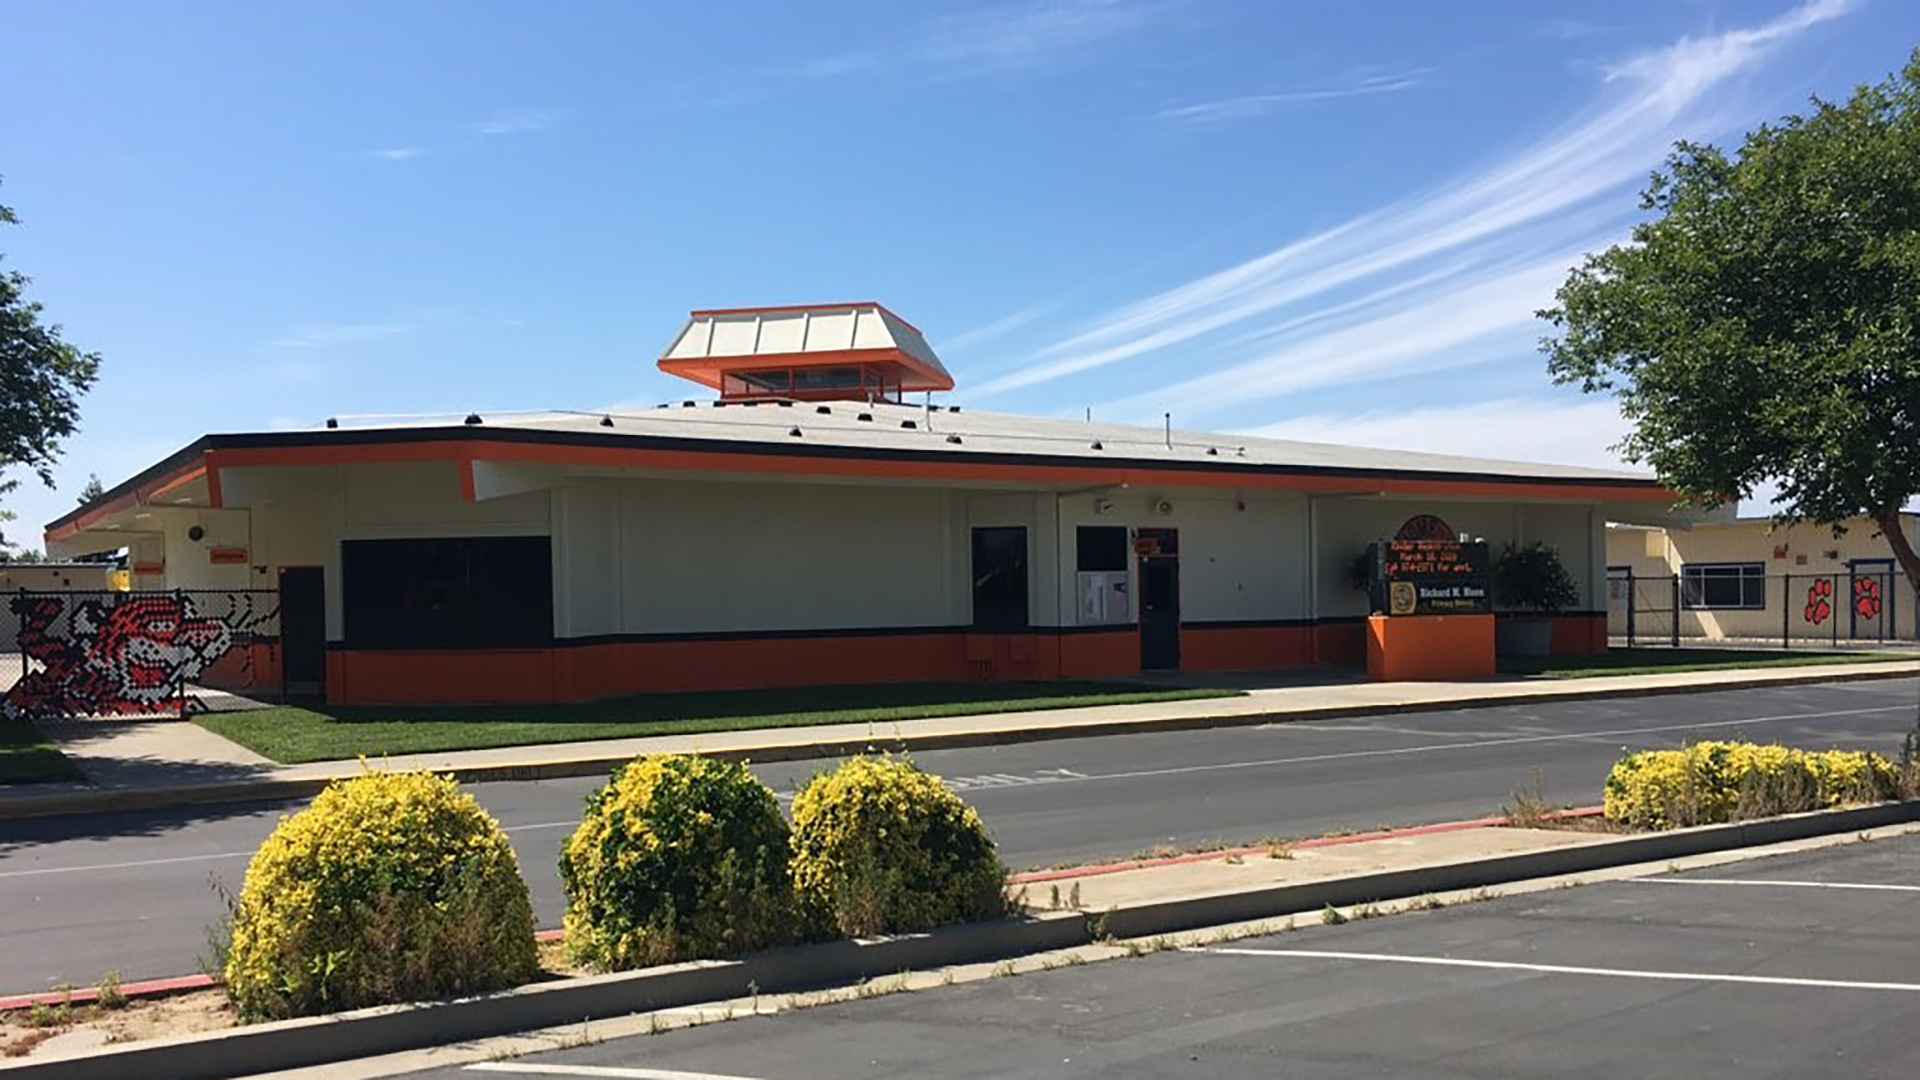 New orange and white painted building.